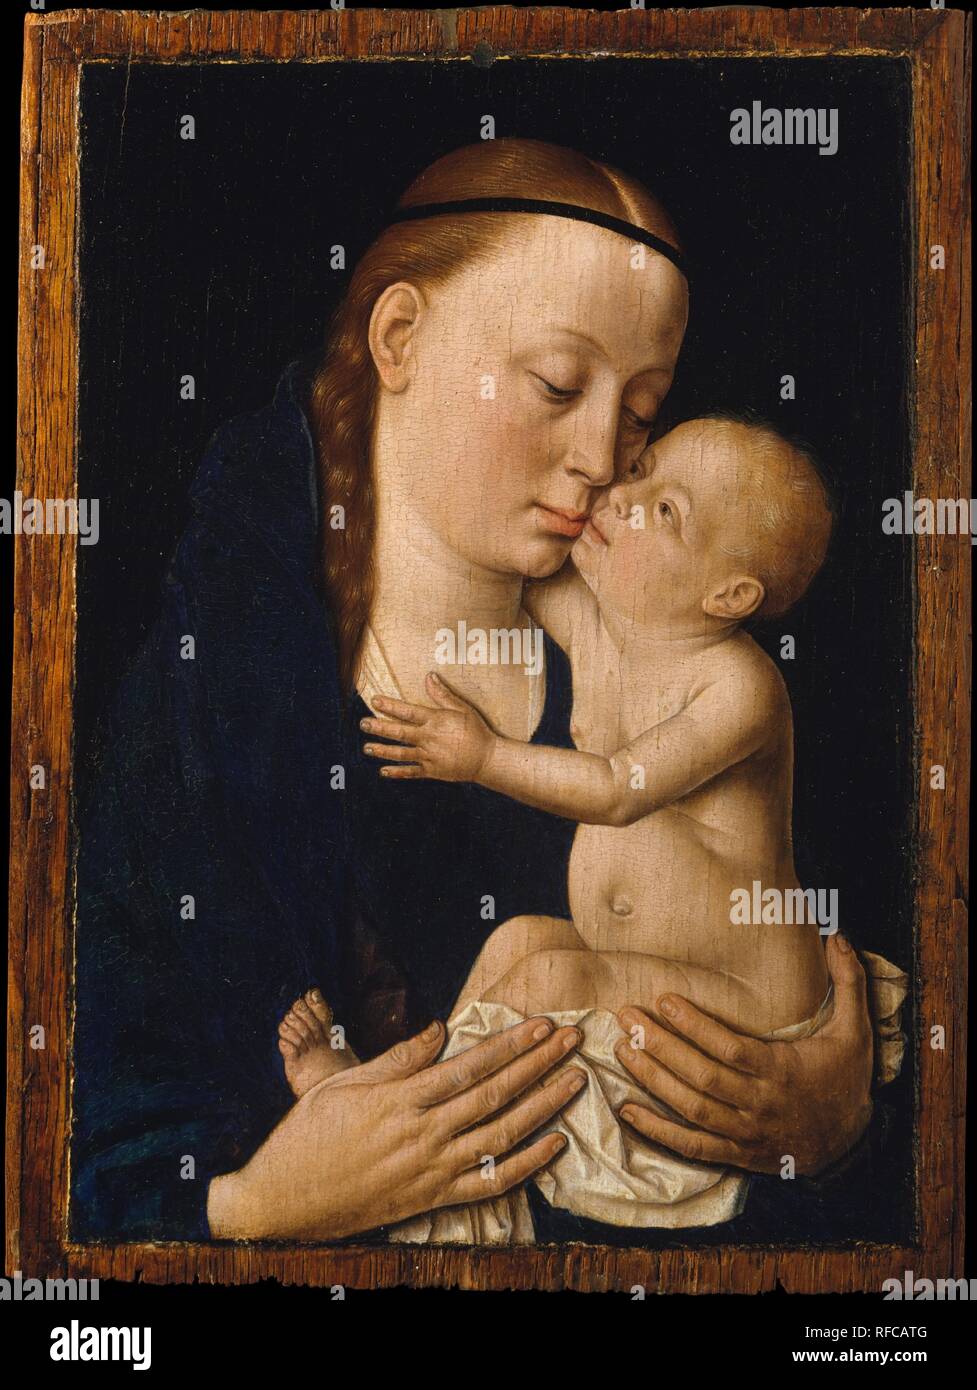 Virgin and Child. Artist: Dieric Bouts (Netherlandish, Haarlem, active by 1457-died 1475). Dimensions: 8 1/2 x 6 1/2 in. (21.6 x 16.5 cm). Date: ca. 1455-60.    Dieric Bouts has based this small, exquisite image on the ancient Byzantine formula for the affectionate Virgin (<i>glykophilousa</i>)--a type popular in the Netherlands. However, he has dispensed with the gold background and halo of Byzantine practice and has endowed the painting with a human tenderness and simplicity not found in icons. With his subtle and tactile modeling of the flesh, the artist heightened the illusion of living, b Stock Photo